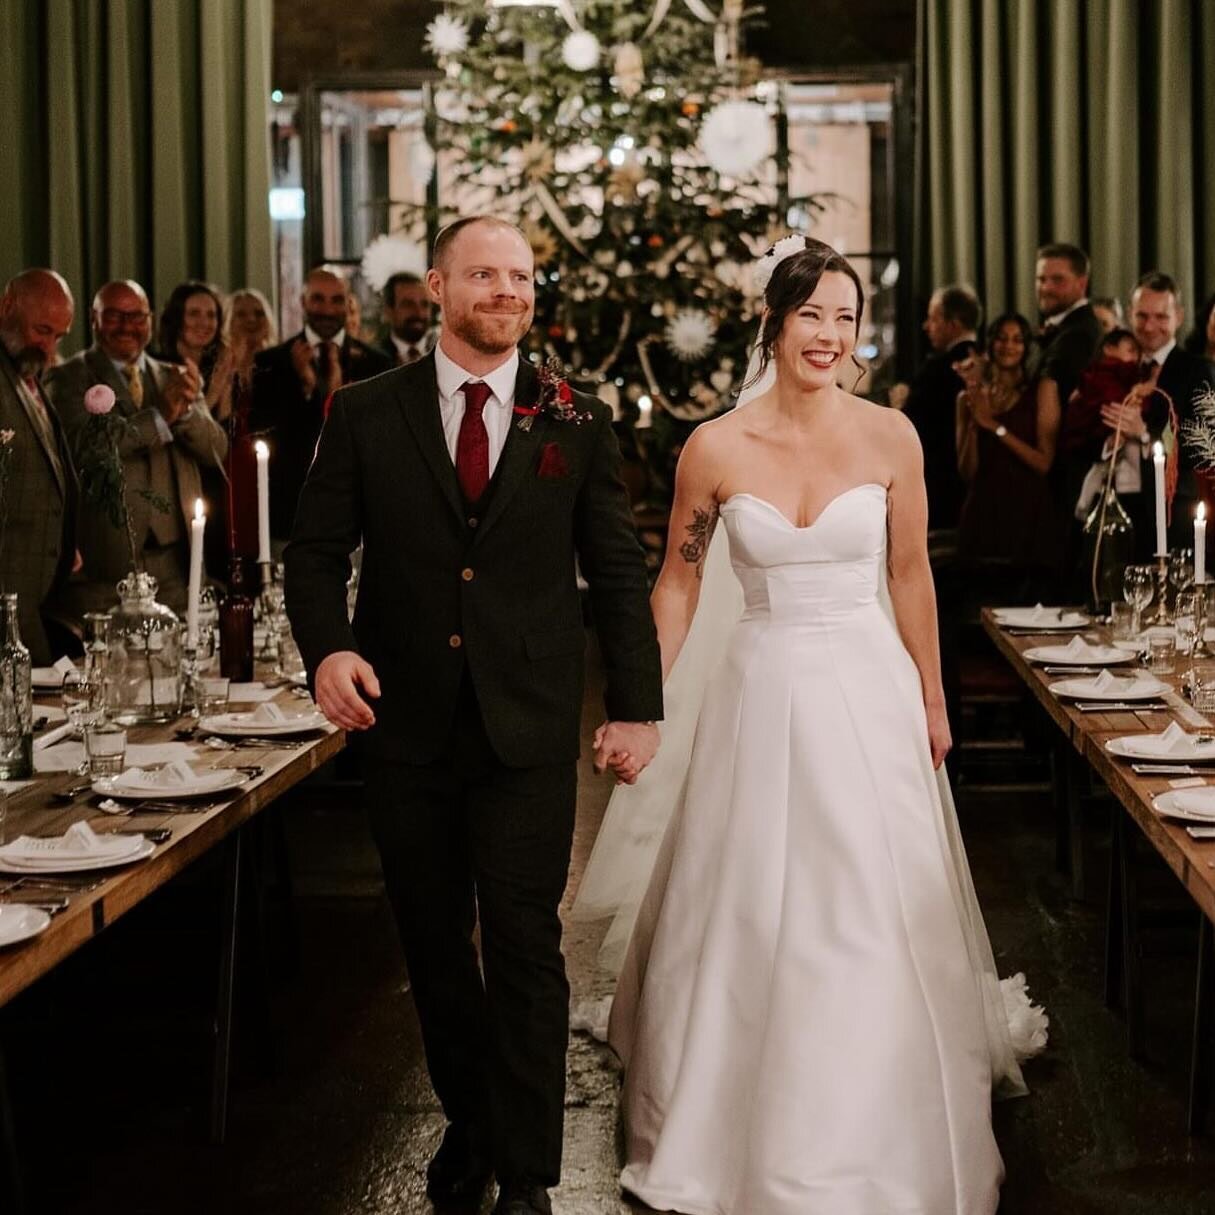 What a gorgeous photo of Anna &amp; Henry exiting after their wedding ceremony at The Mowbray, Sheffield, before Christmas. It was a magical day &amp; it was wonderful working with Anna &amp; Henry on their unique &amp; stunning ceremony which includ